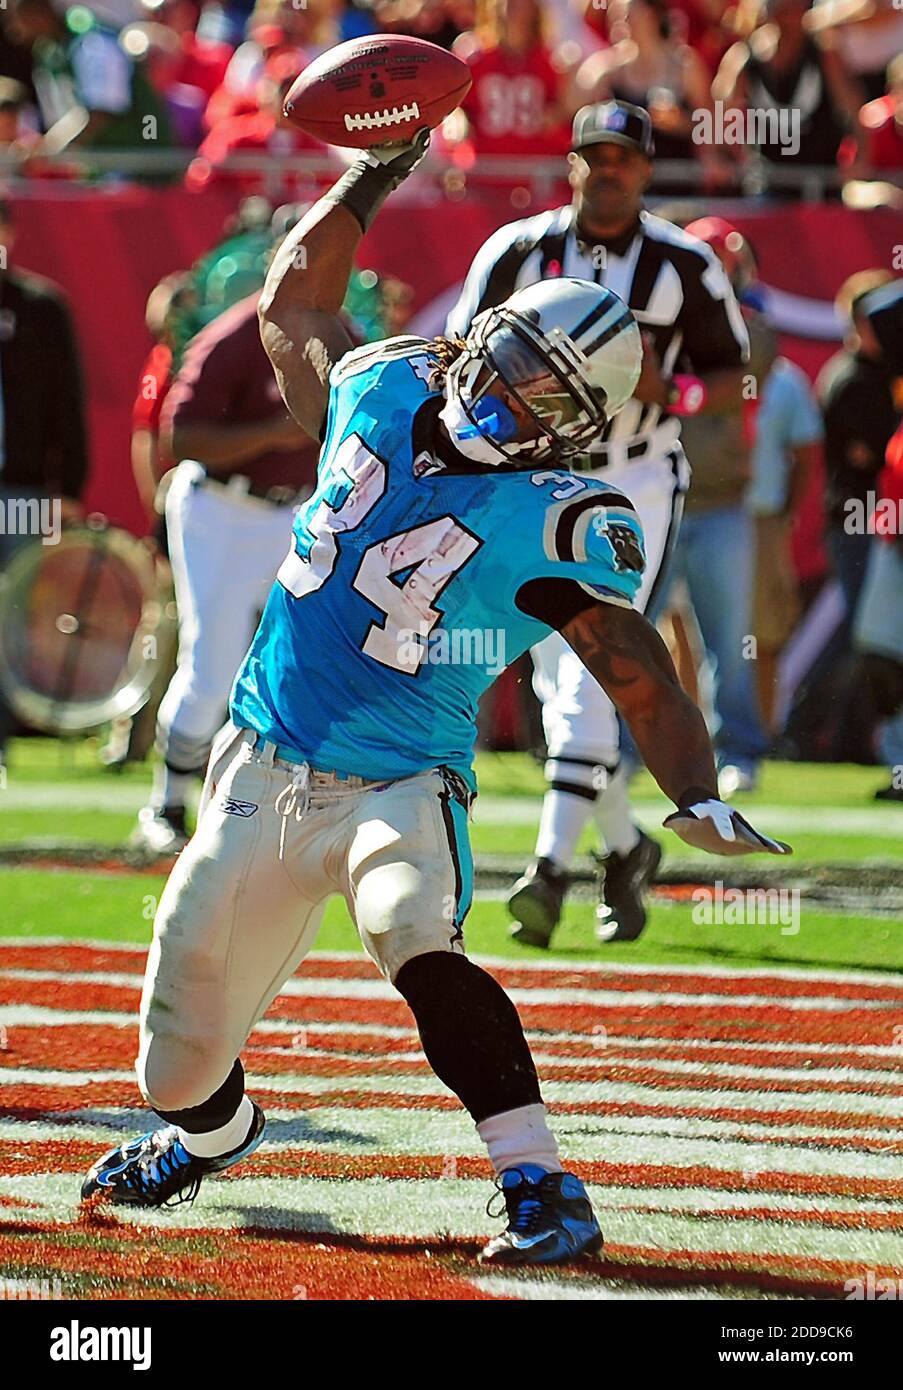 NO FILM, NO VIDEO, NO TV, NO DOCUMENTARY - Carolina Panthers running back DeAngelo Williams (34) spikes the football after scoring a touchdown against the Tampa Bay Buccaneers in fourth-quarter action at Raymond James Stadium in Tampa, FL, USA on October 18, 2009. The Panthers defeated the Buccaneers, 28-21. Photo by Jeff Siner/Charlotte Observer/MCT/Cameleon/ABACAPRESS.COM Stock Photo